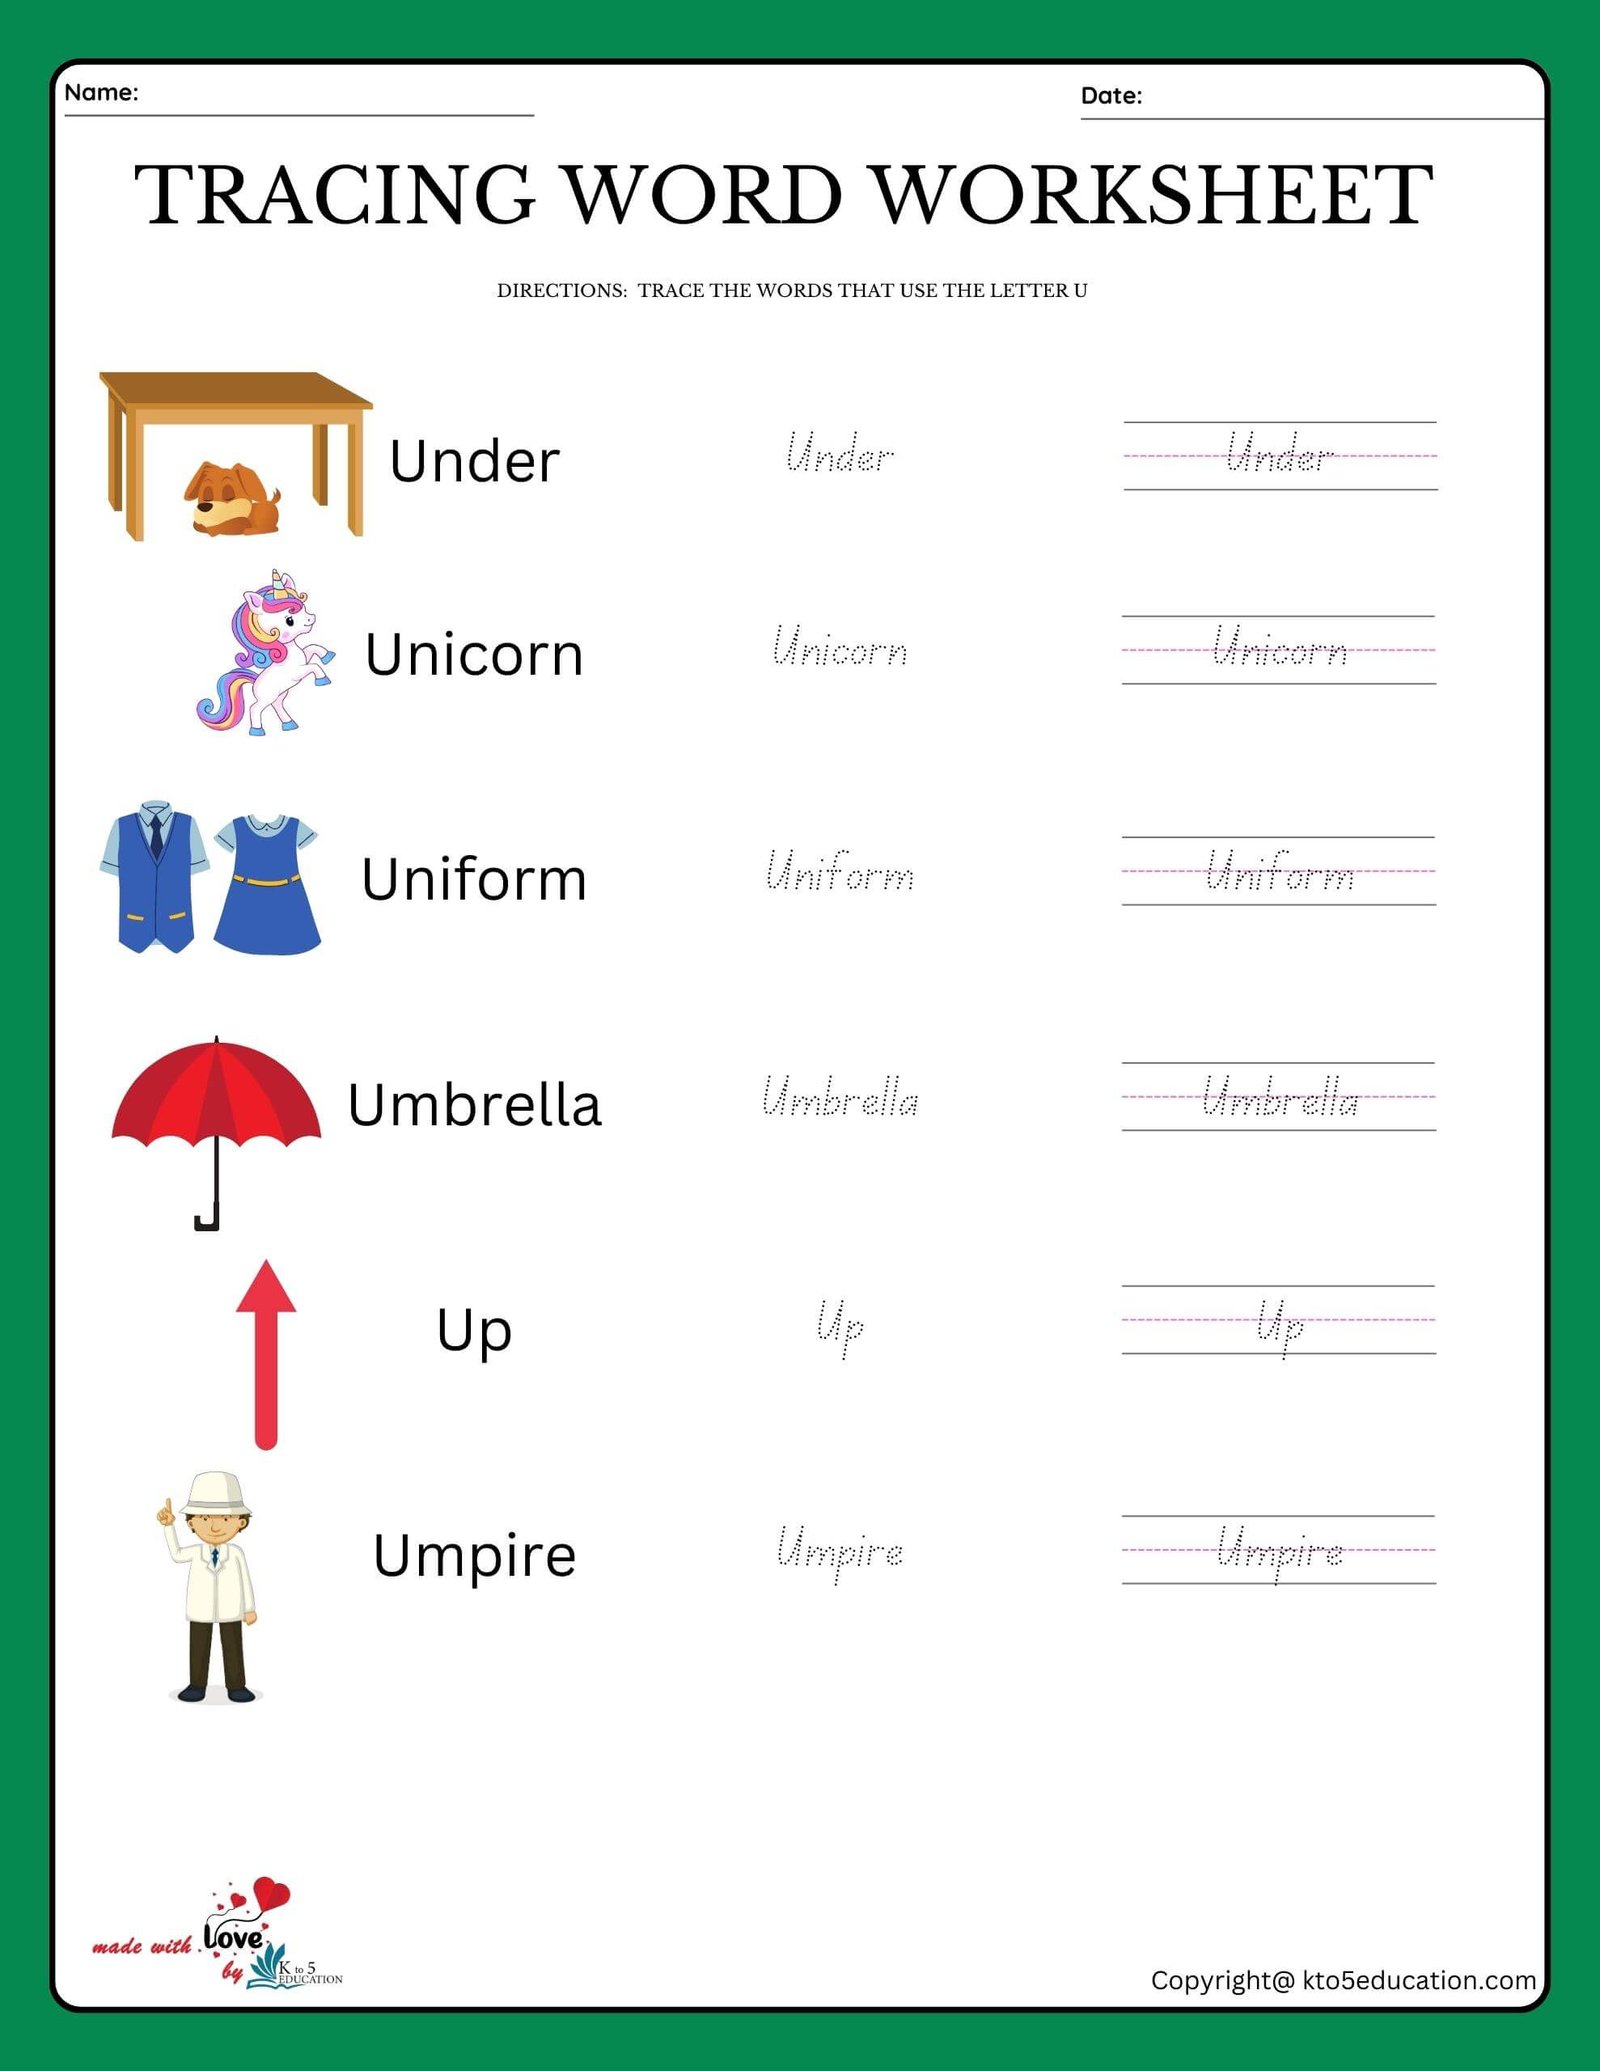 Trace The Words That Use The Letter U Worksheet